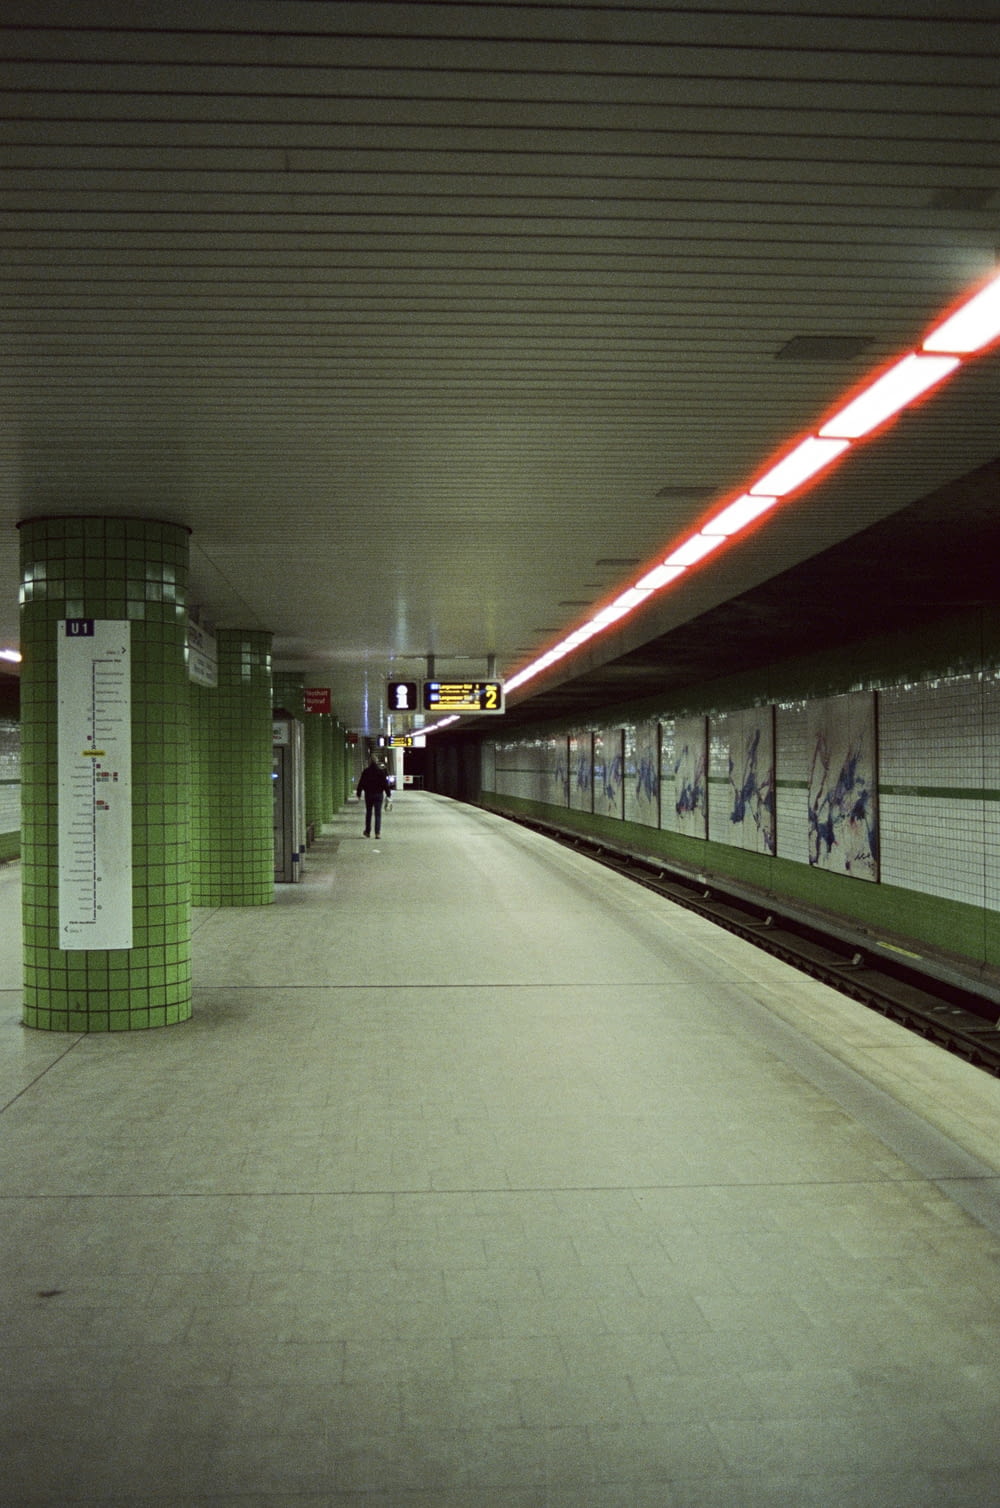 a subway station with a person walking on the platform